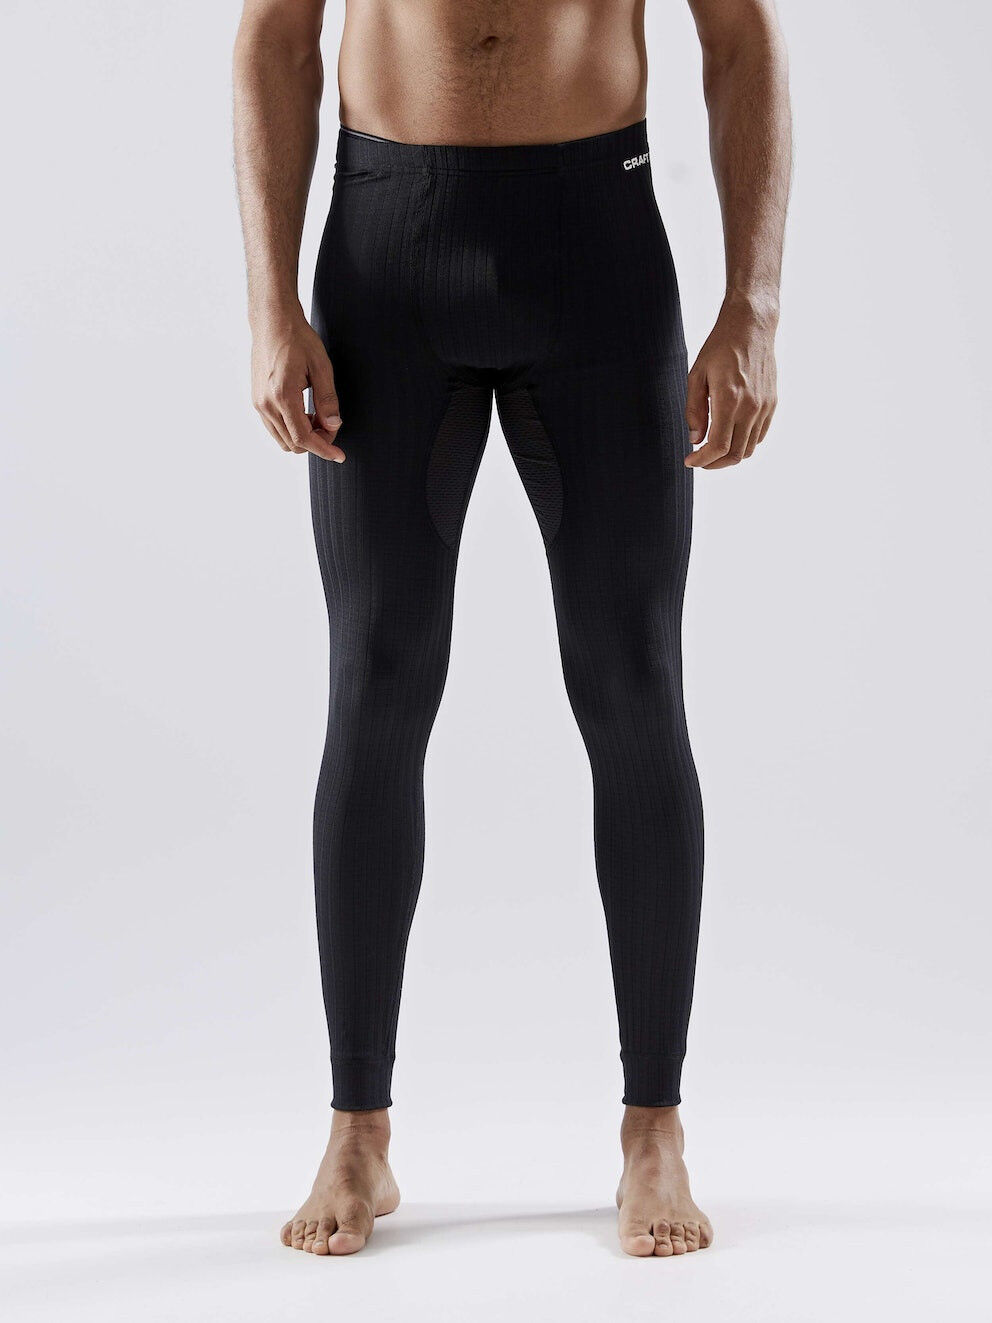 Craft ACTIVE Extreme X Pant - Ropa interior - Hombre | Hardloop